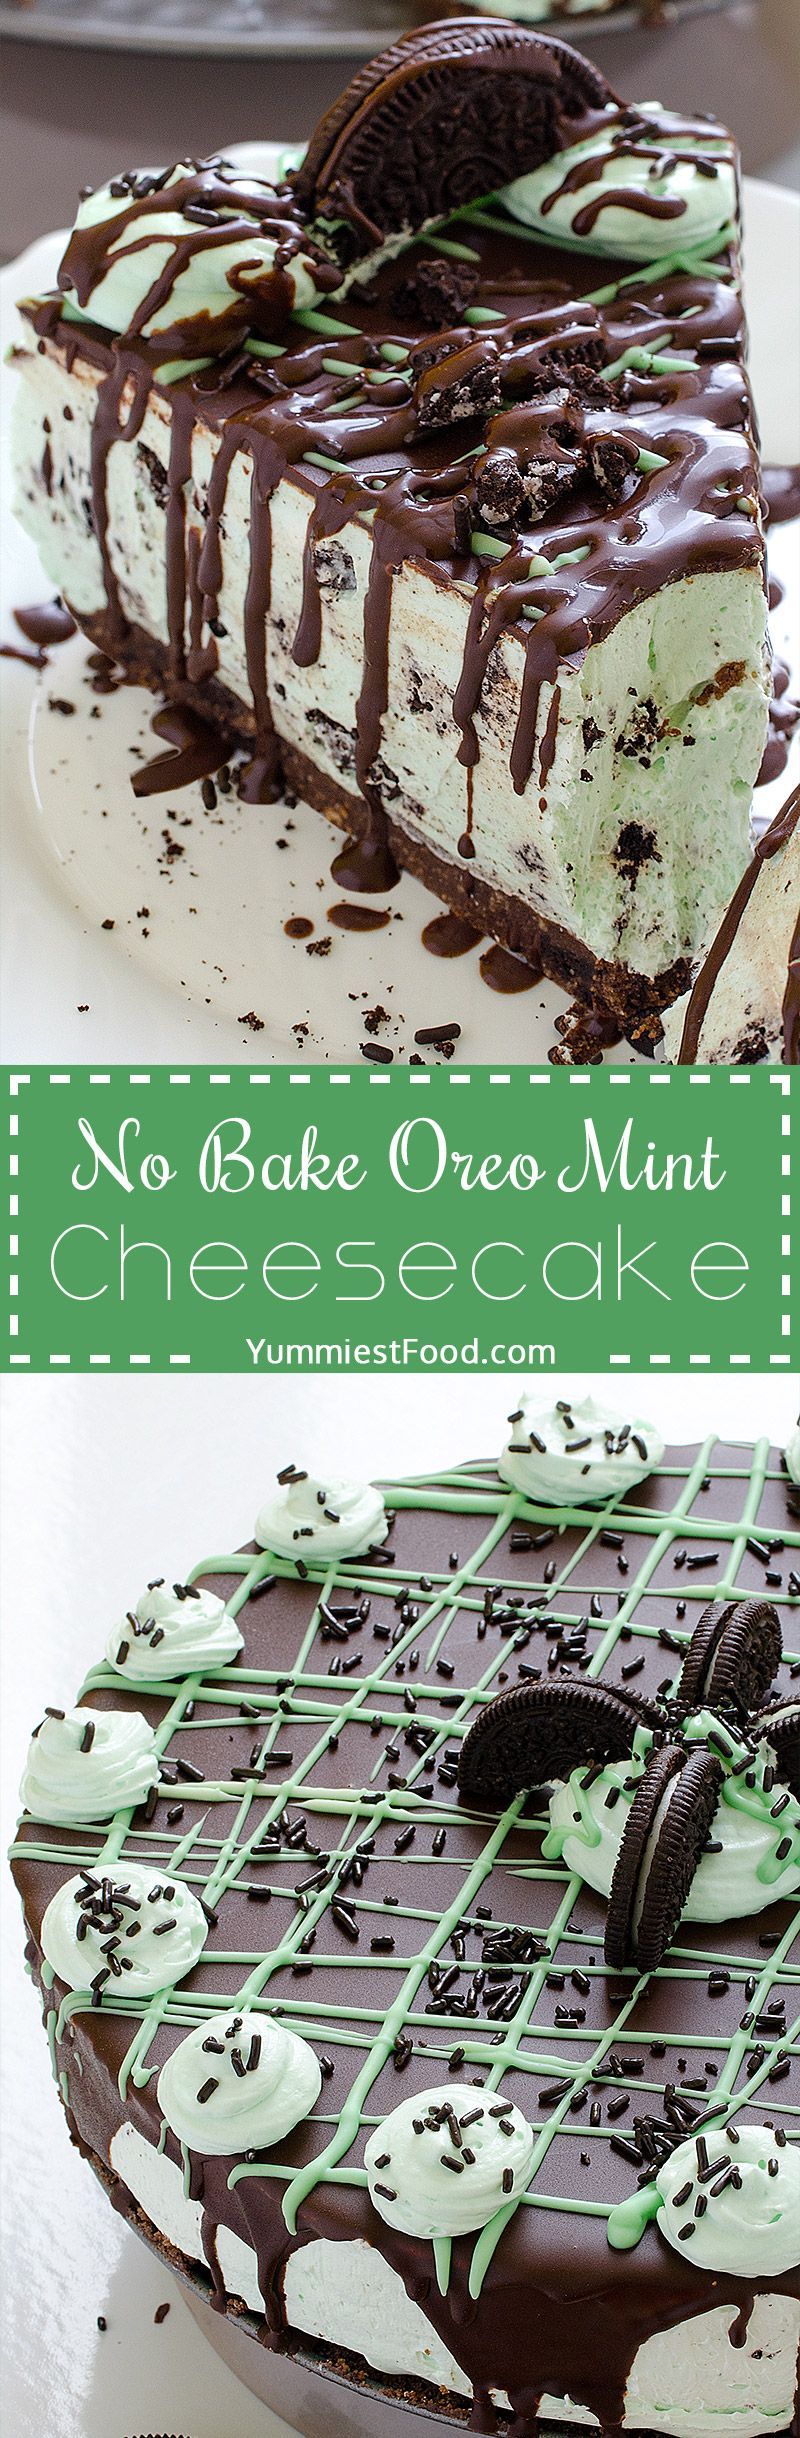 No Bake Oreo Mint Cheesecake – try to make this Cheesecake, and you will see that you have never made